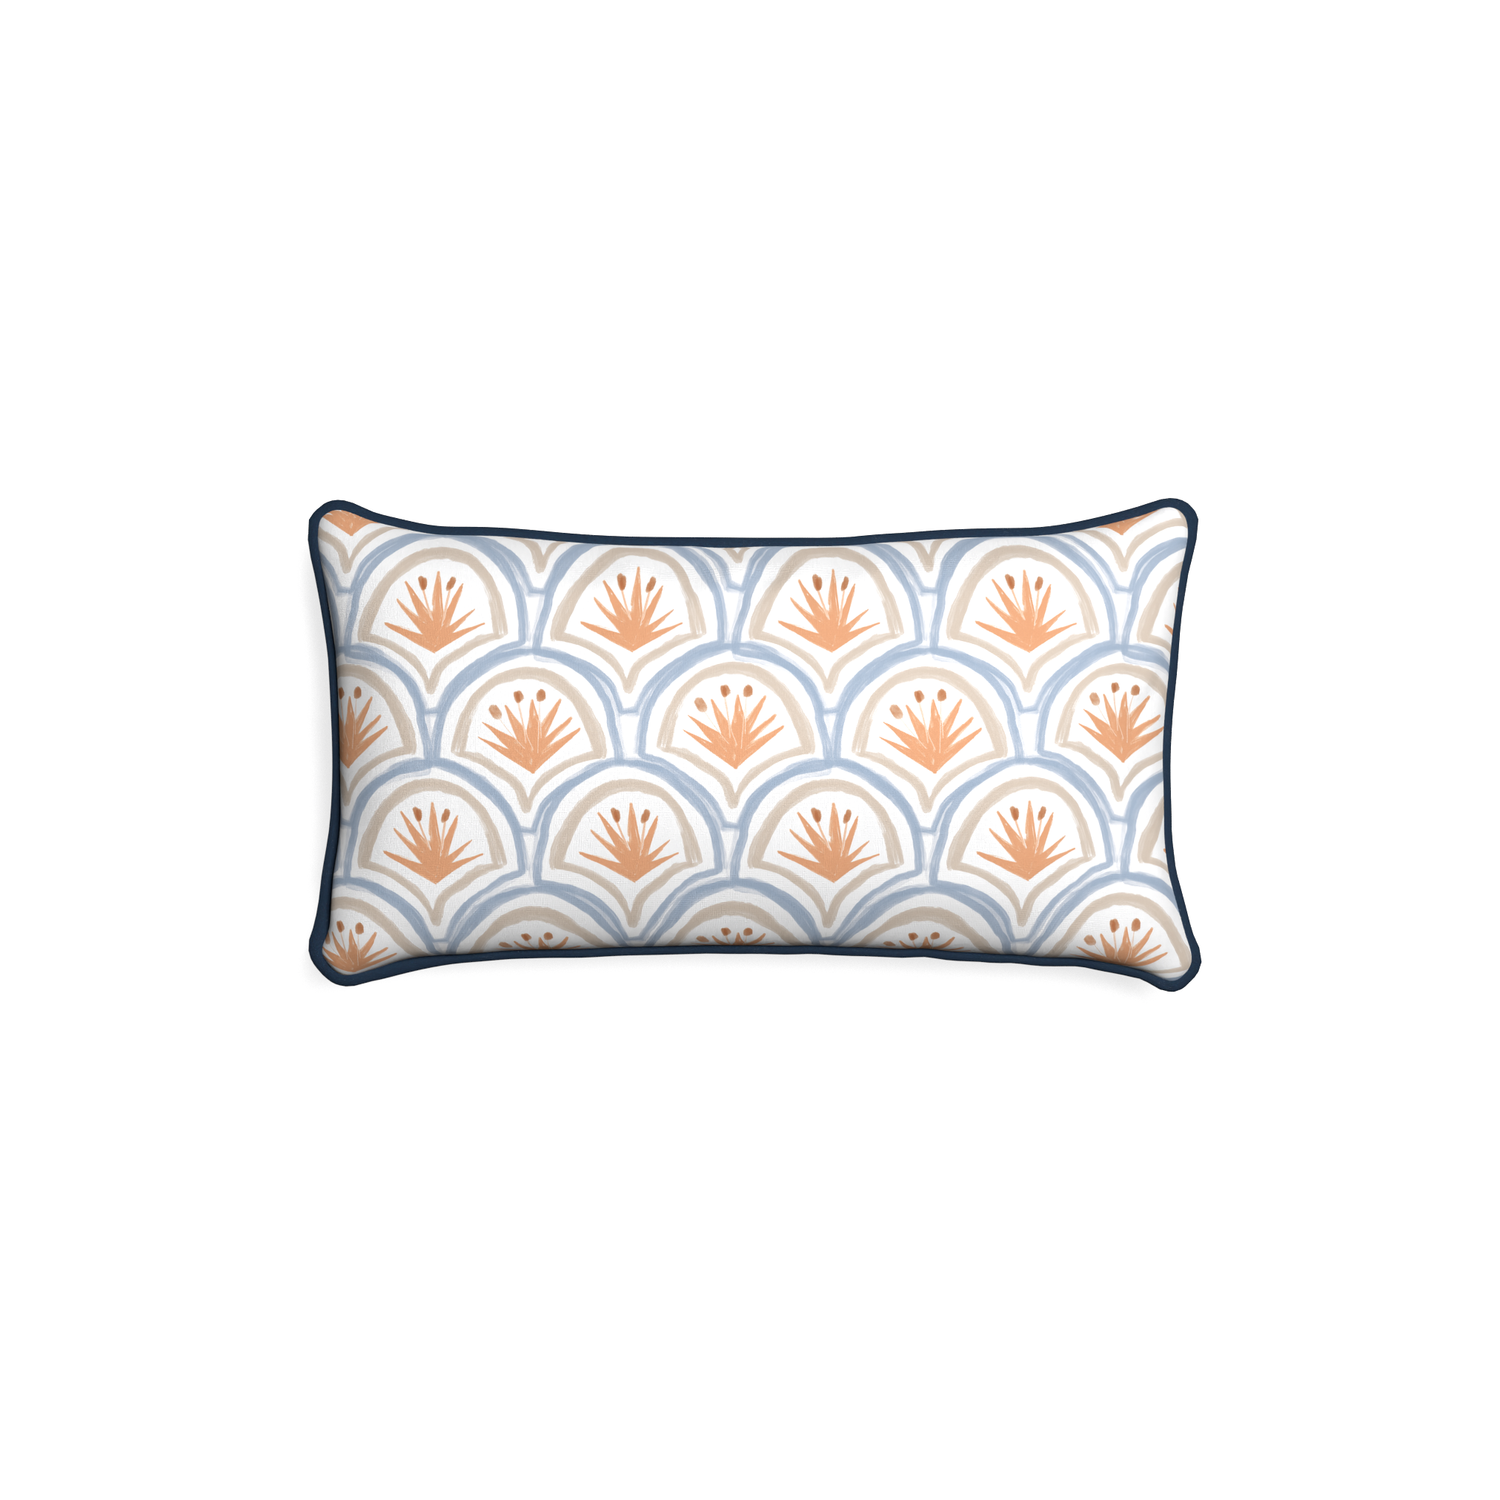 Petite-lumbar thatcher apricot custom art deco palm patternpillow with c piping on white background